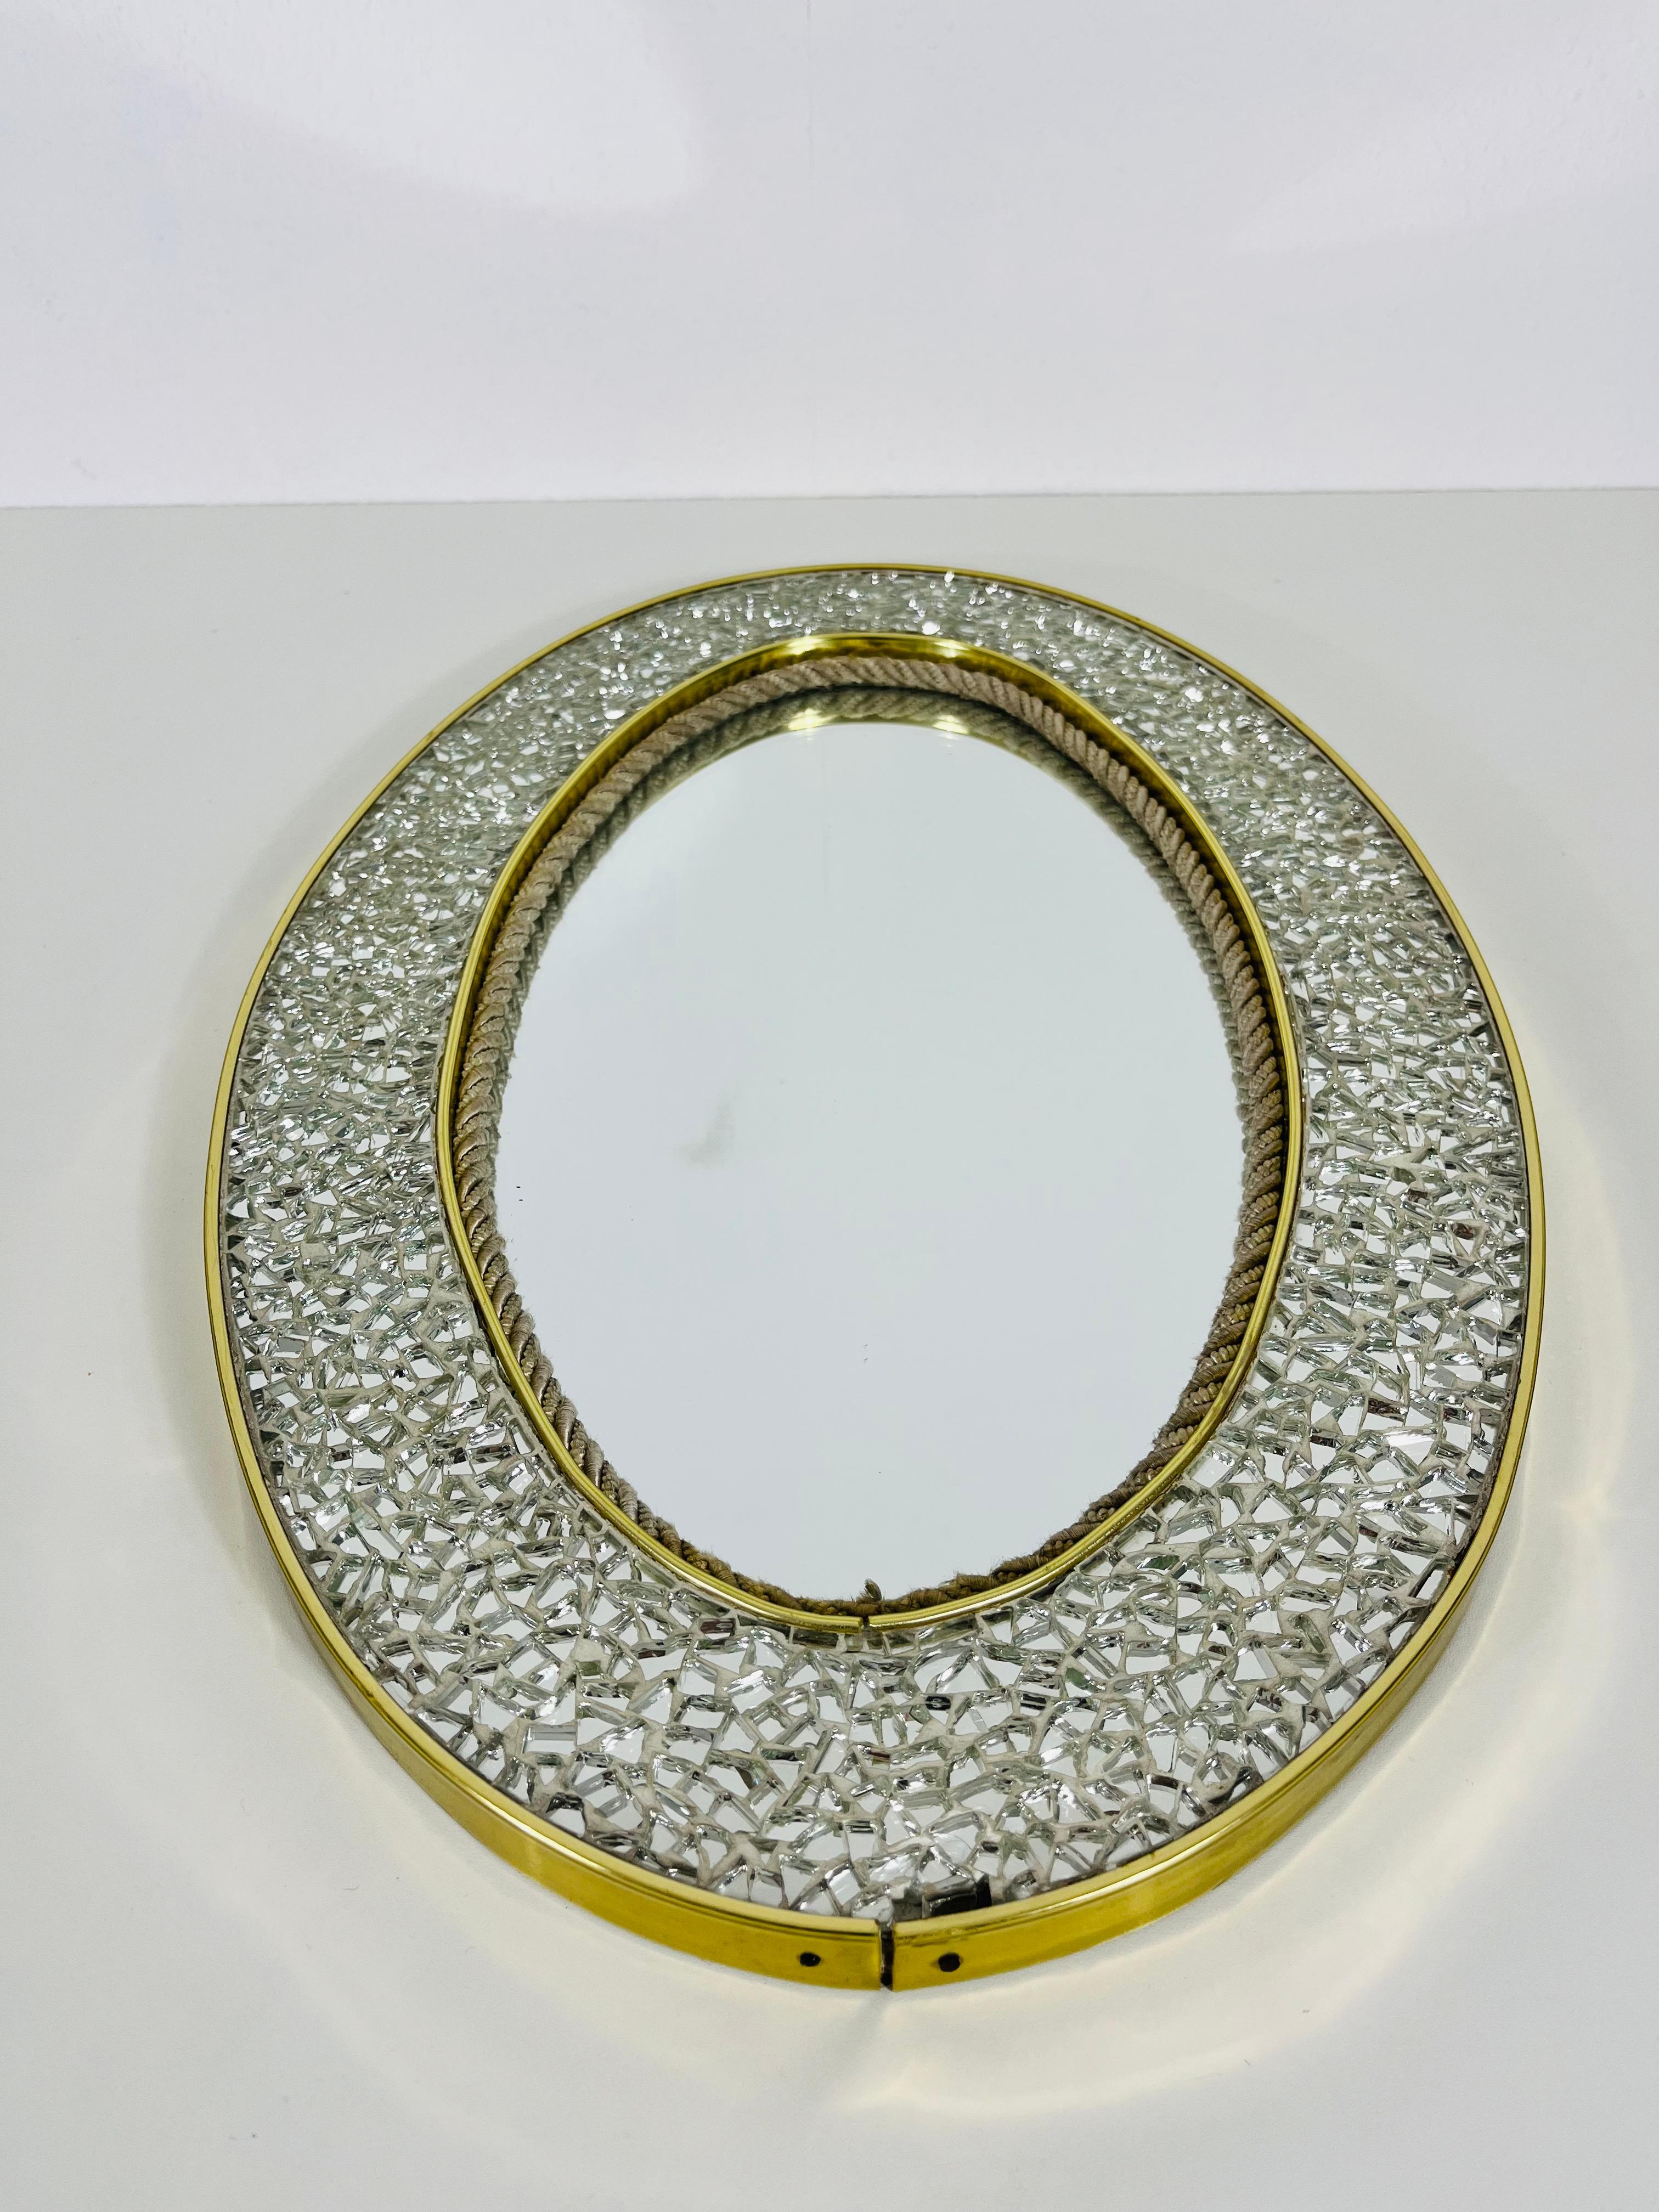 An asymmetrical Italian brass framed wall mirror. Beautiful with its mosaic design.

Good vintage condition. Free worldwide express shipping.

